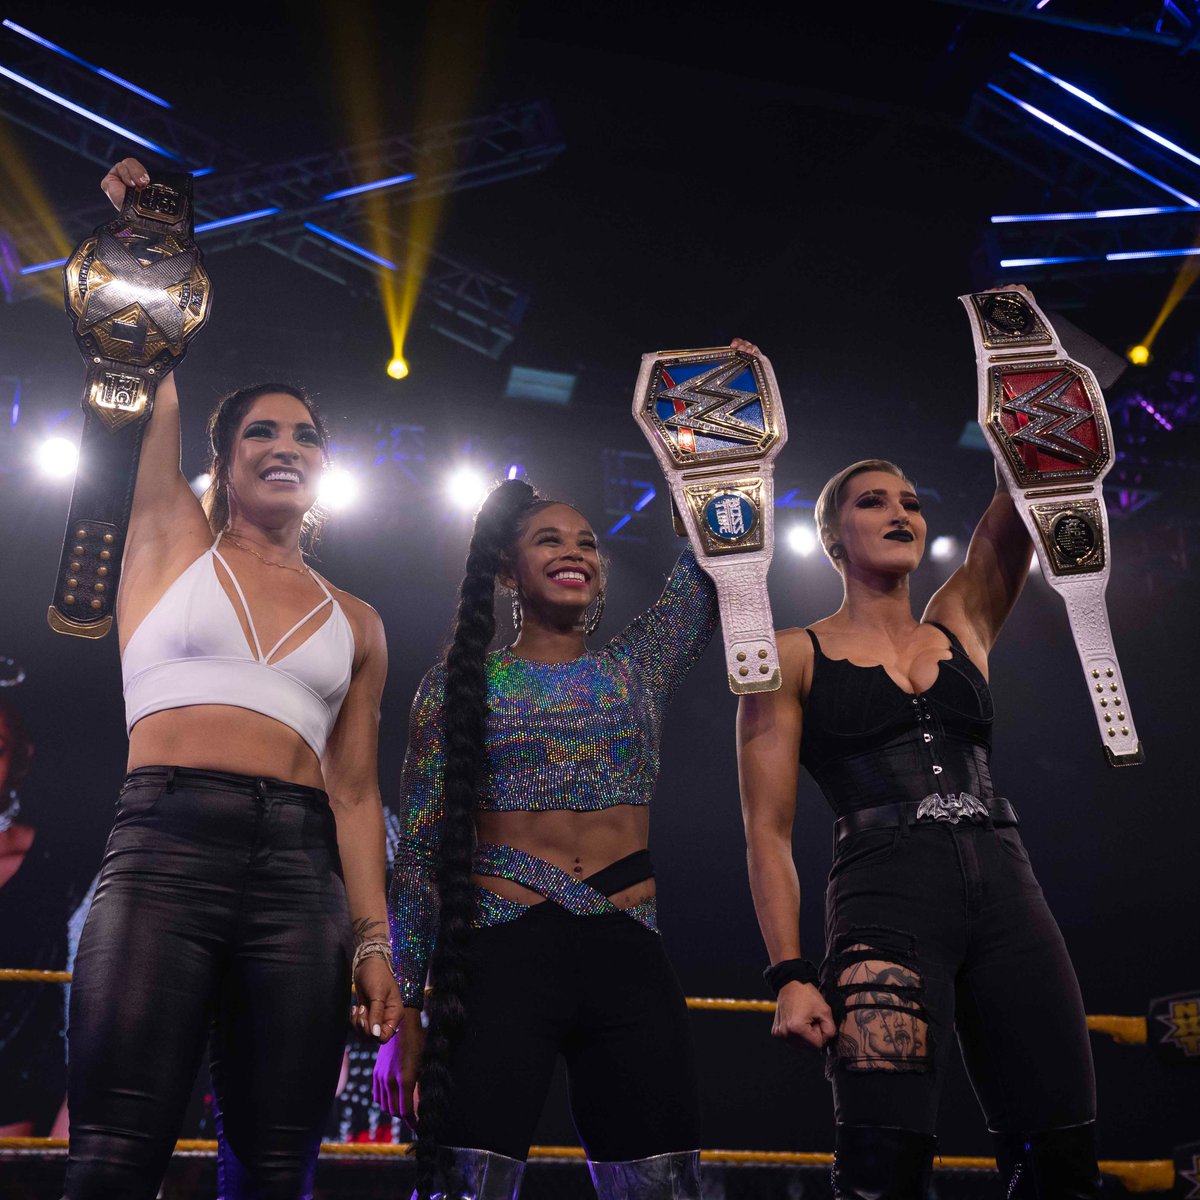 3 years ago, @BiancaBelairWWE, @RheaRipley_WWE, and @RaquelWWE stood at the top of their respective Women's Divisions in @WWE! #wwe